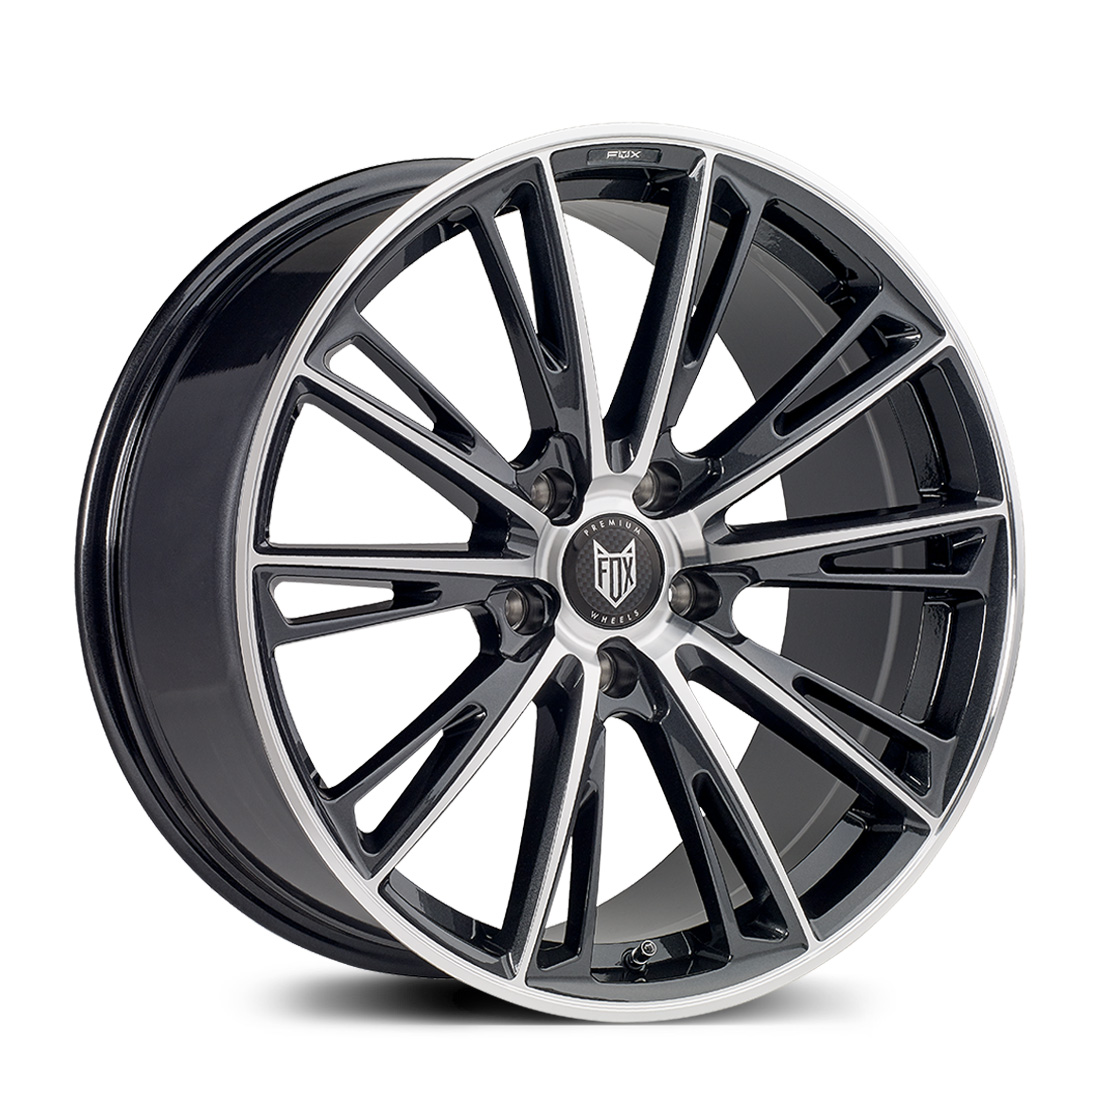 NEW 19" FOX OMEGA ALLOY WHEELS IN ZINC GUNMETAL WITH POLISHED FACE, WIDER 9" REARS